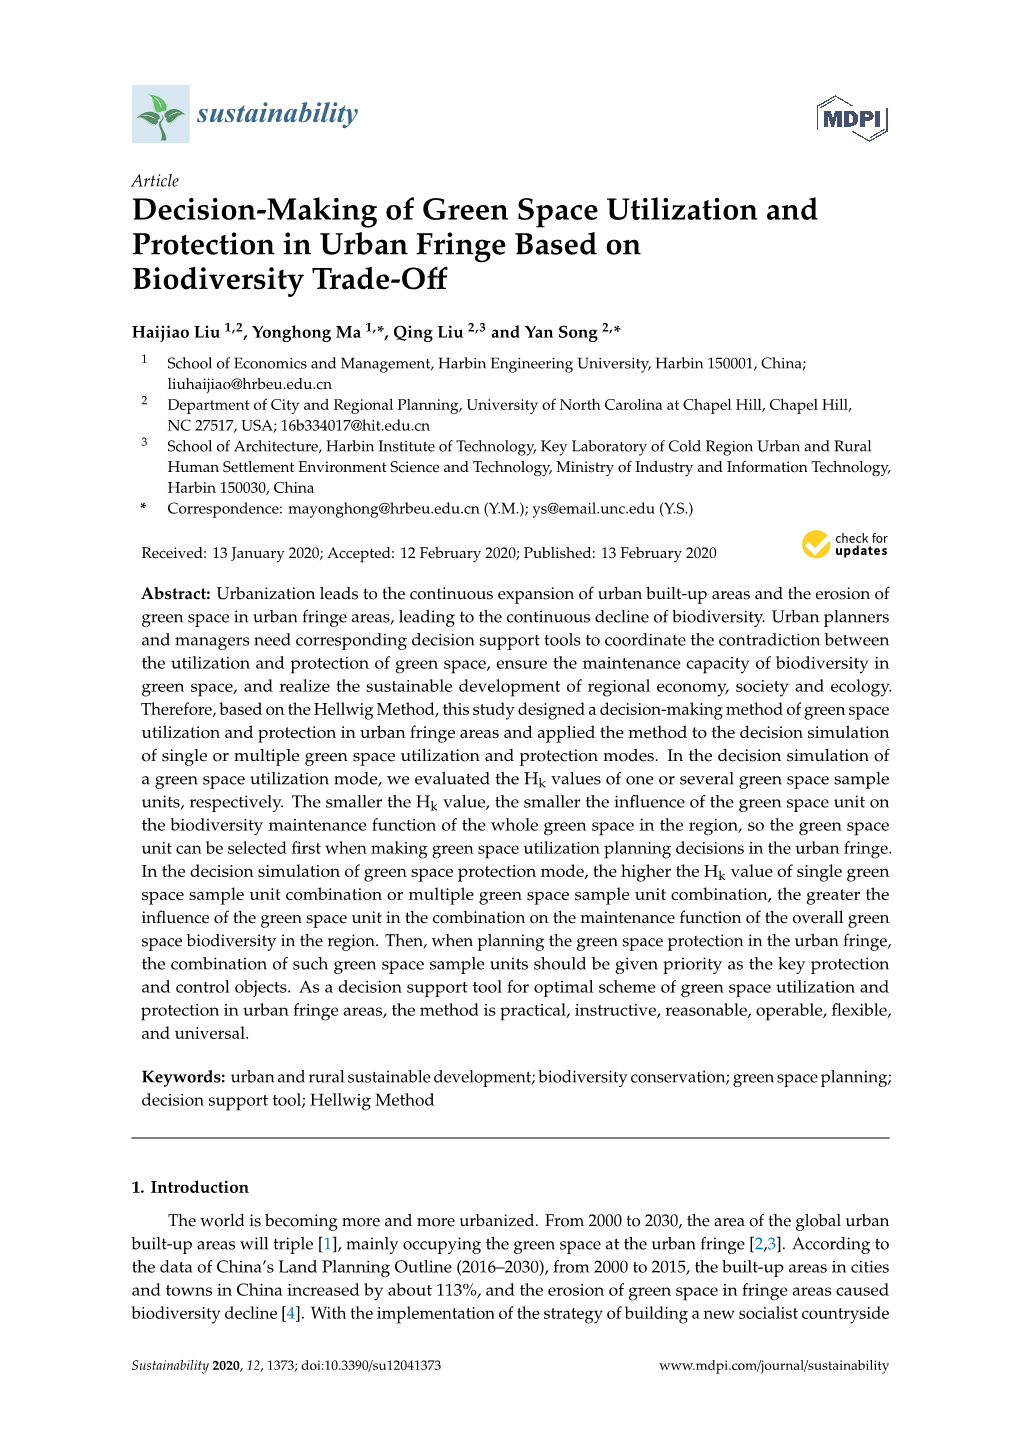 Decision-Making of Green Space Utilization and Protection in Urban Fringe Based on Biodiversity Trade-Oﬀ